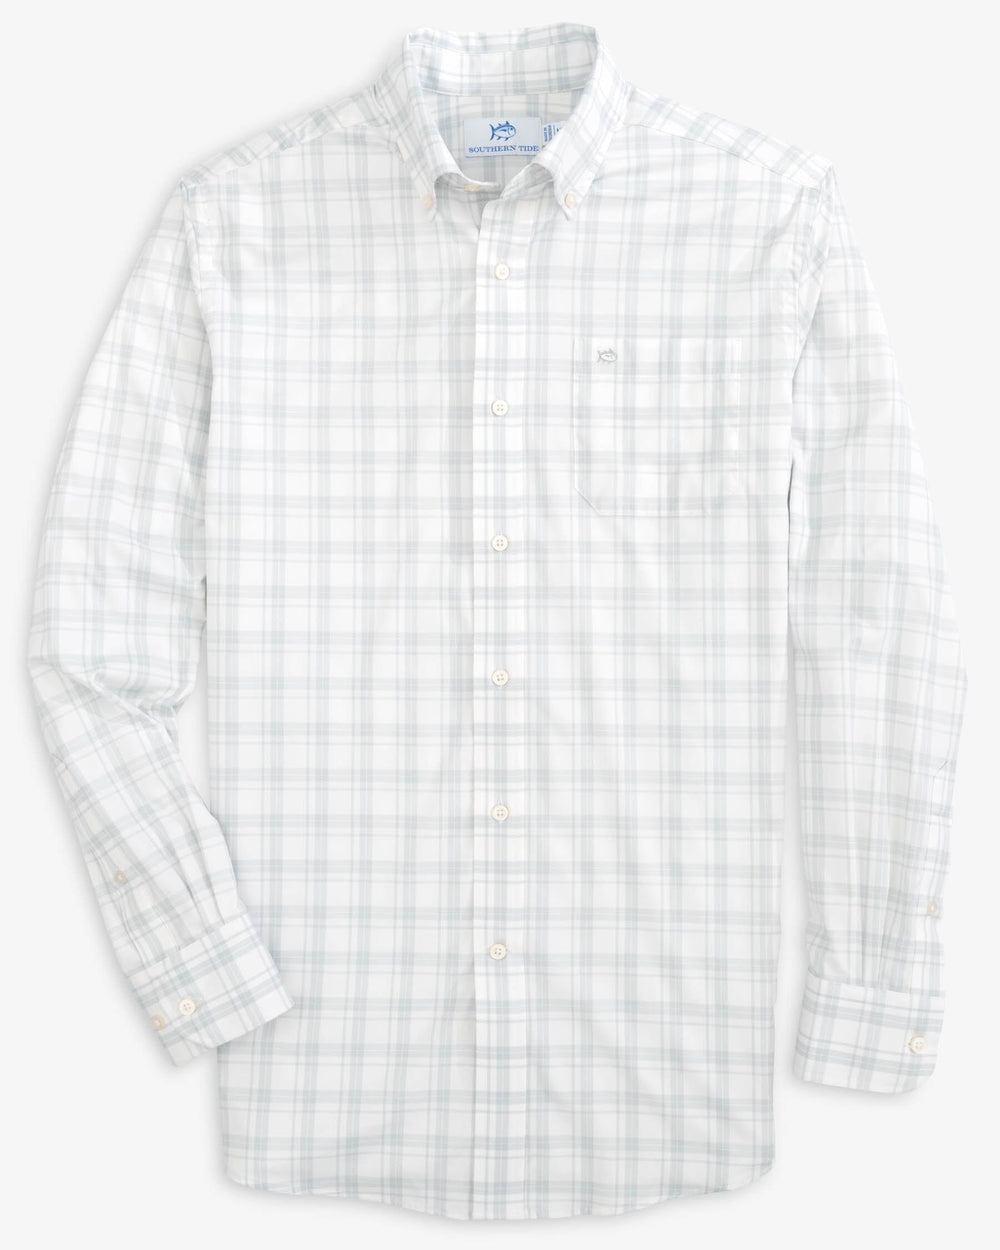 The front view of the Southern Tide Brrr Ramsey Plaid Intercoastal Long Sleeve Button Down Sport shirt by Southern Tide - Classic White